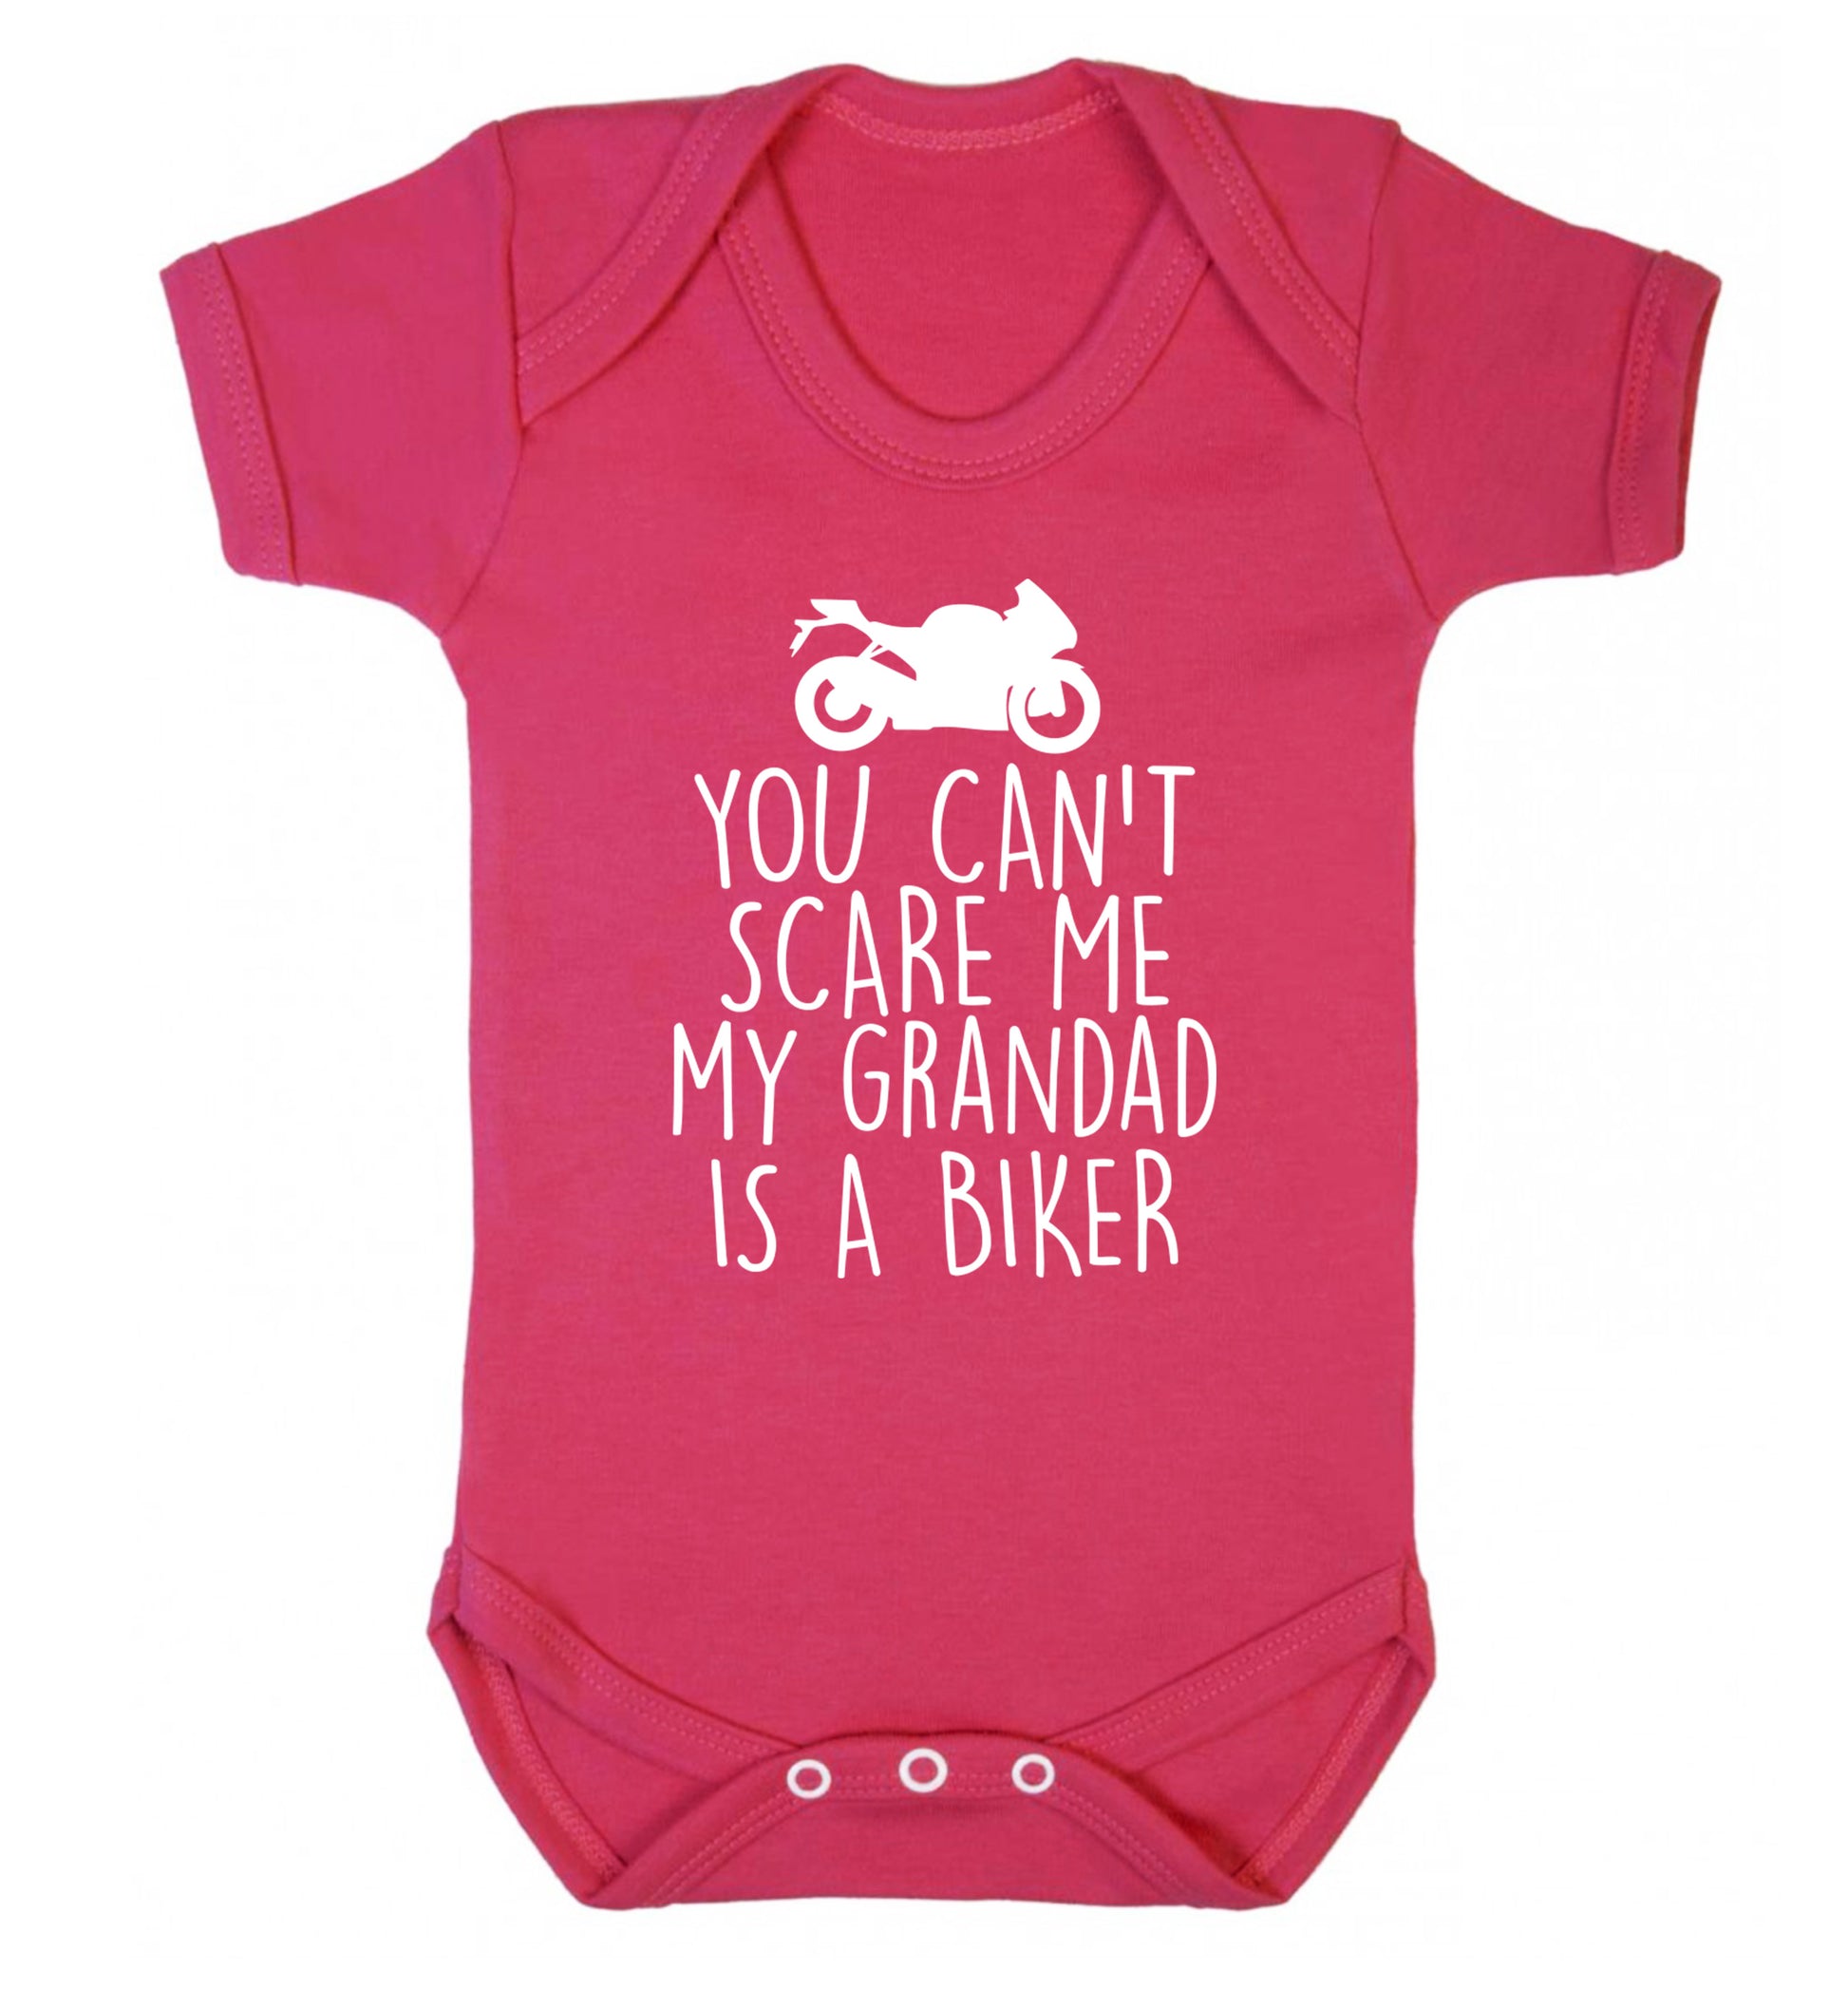 You can't scare me my grandad is a biker Baby Vest dark pink 18-24 months